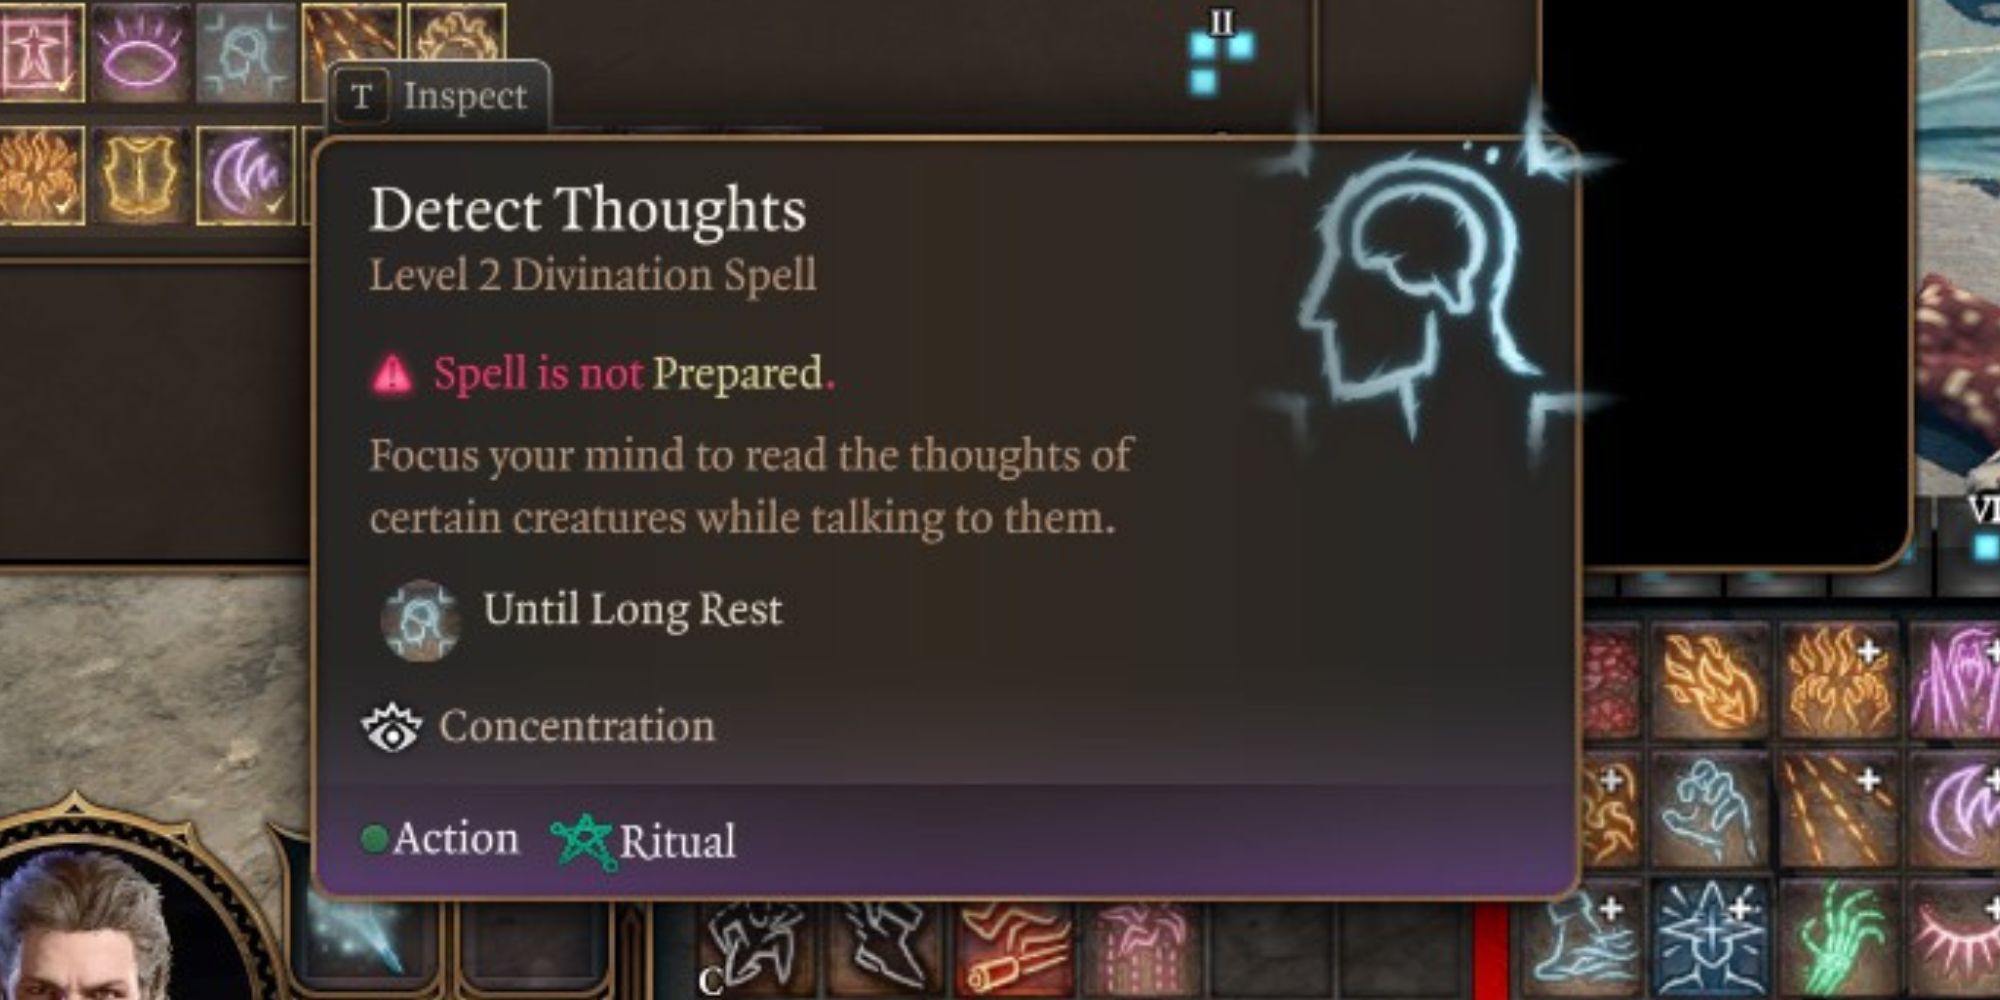 Detect Thoughts spell in Baldur's Gate 3